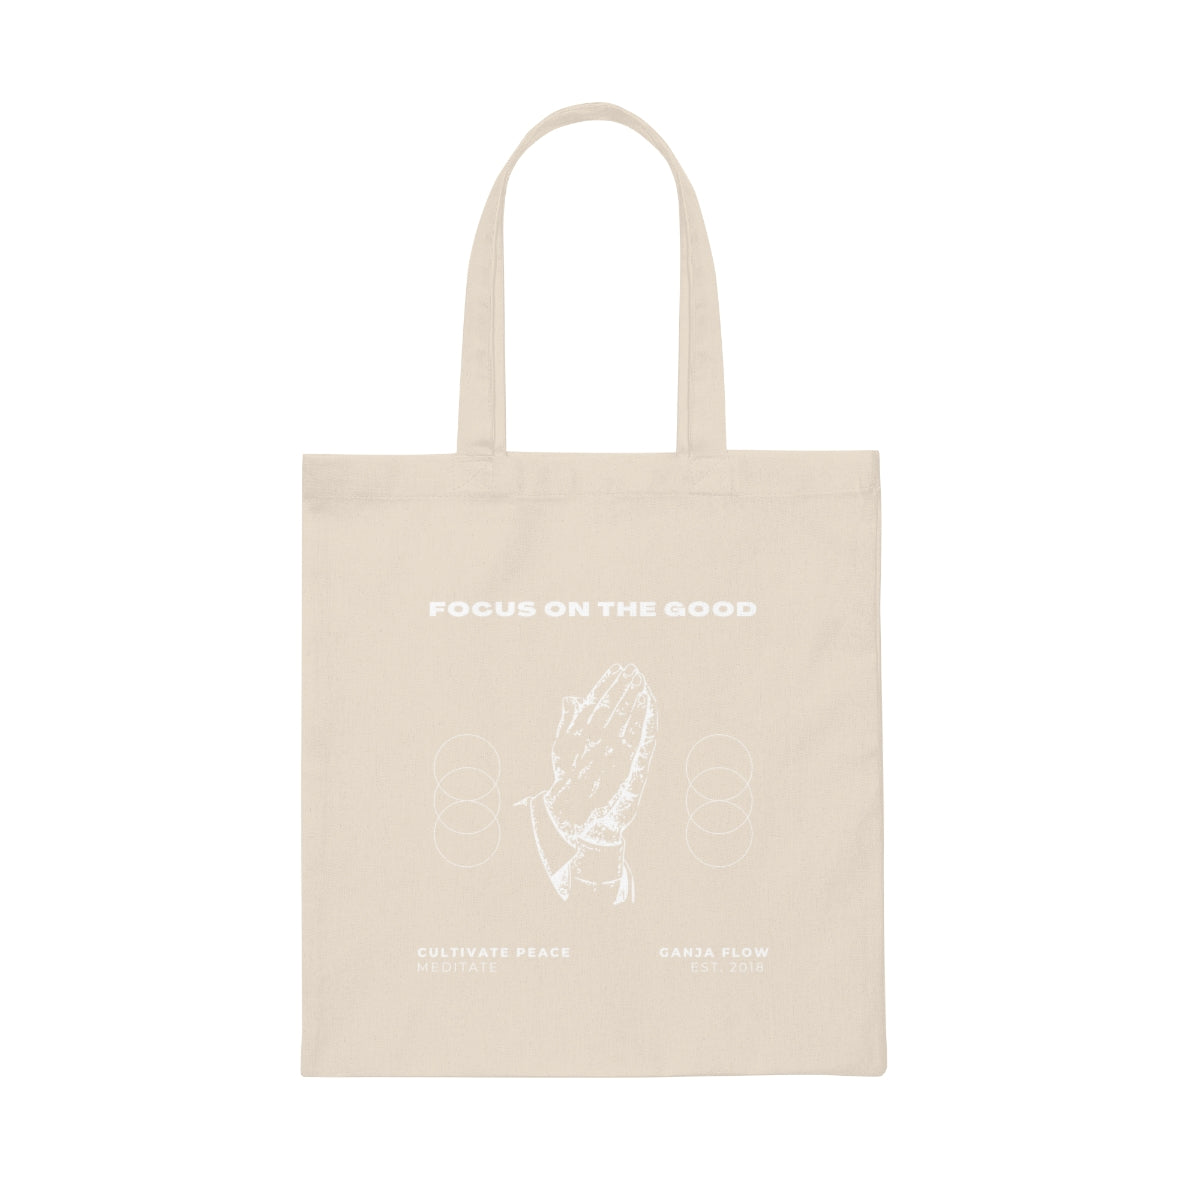 Focus On the Good Canvas Tote